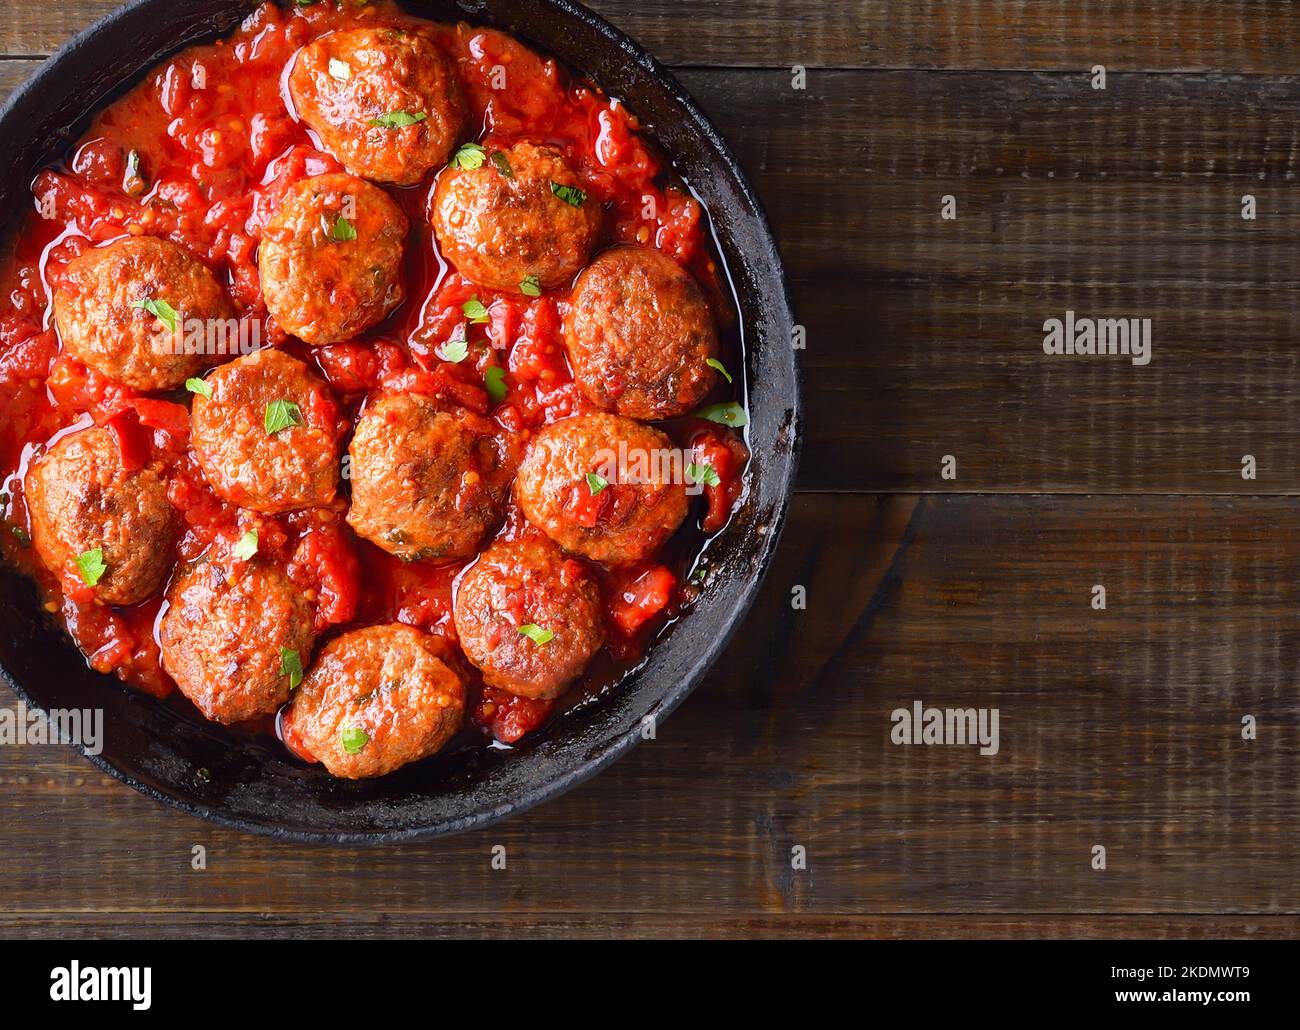 Fried meatballs with tomato sauce in frying pan. Top view, flat lay Stock Photo